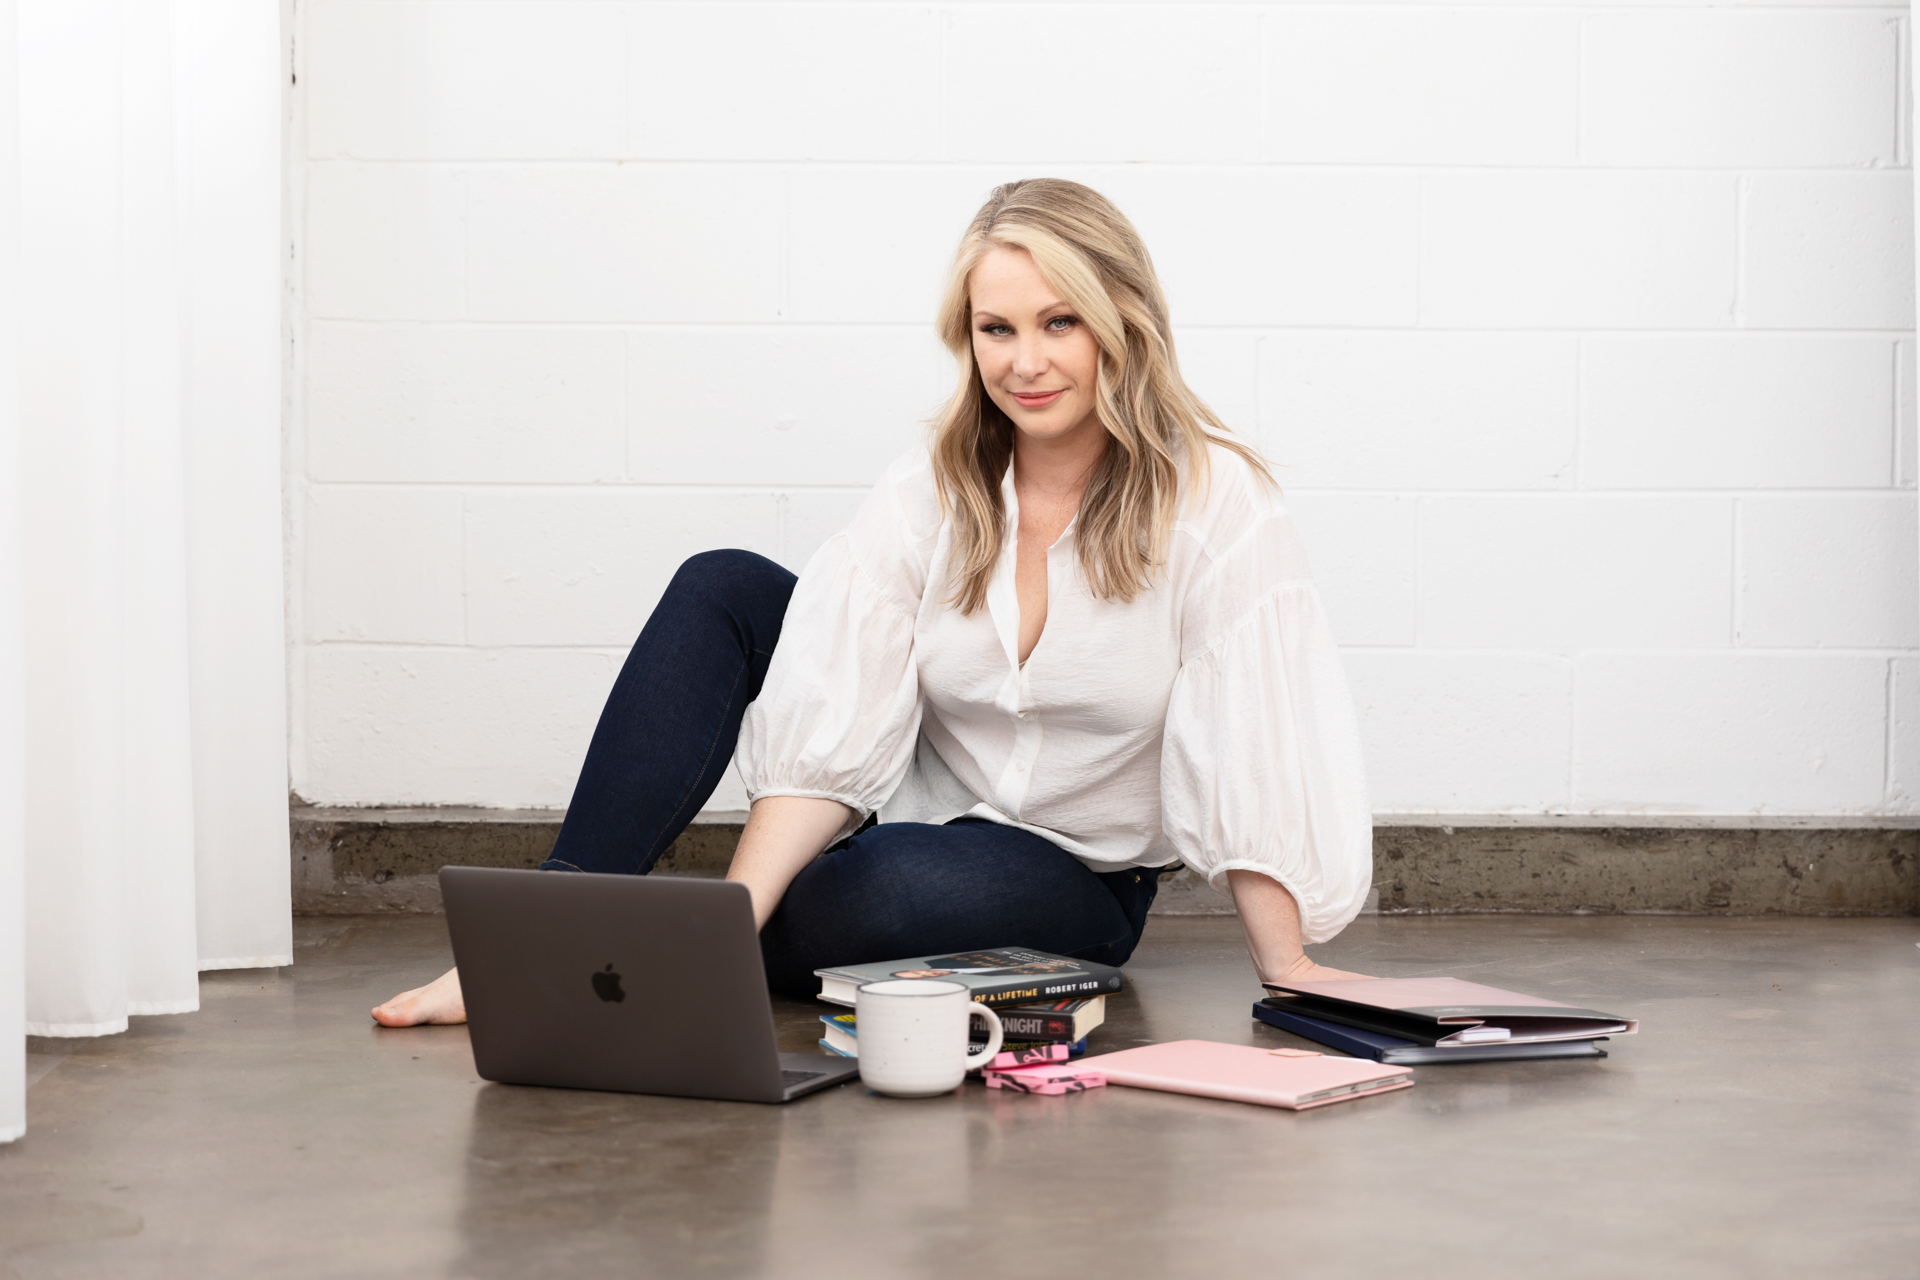 personal branding photo of a presentation coach sitting on the floor while working on a laptop